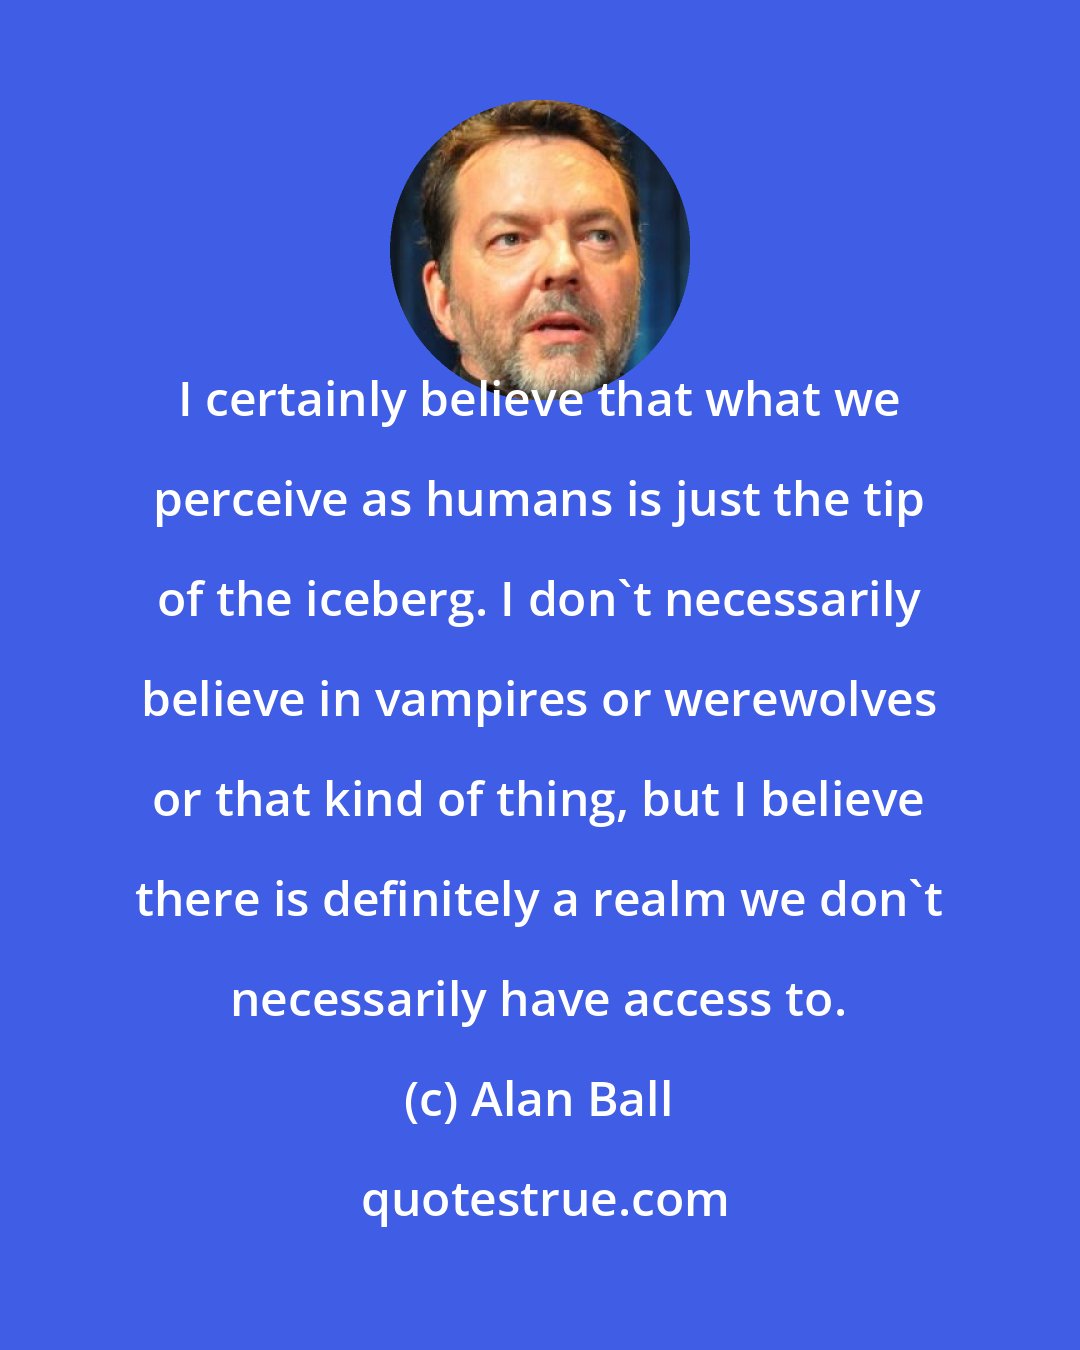 Alan Ball: I certainly believe that what we perceive as humans is just the tip of the iceberg. I don't necessarily believe in vampires or werewolves or that kind of thing, but I believe there is definitely a realm we don't necessarily have access to.